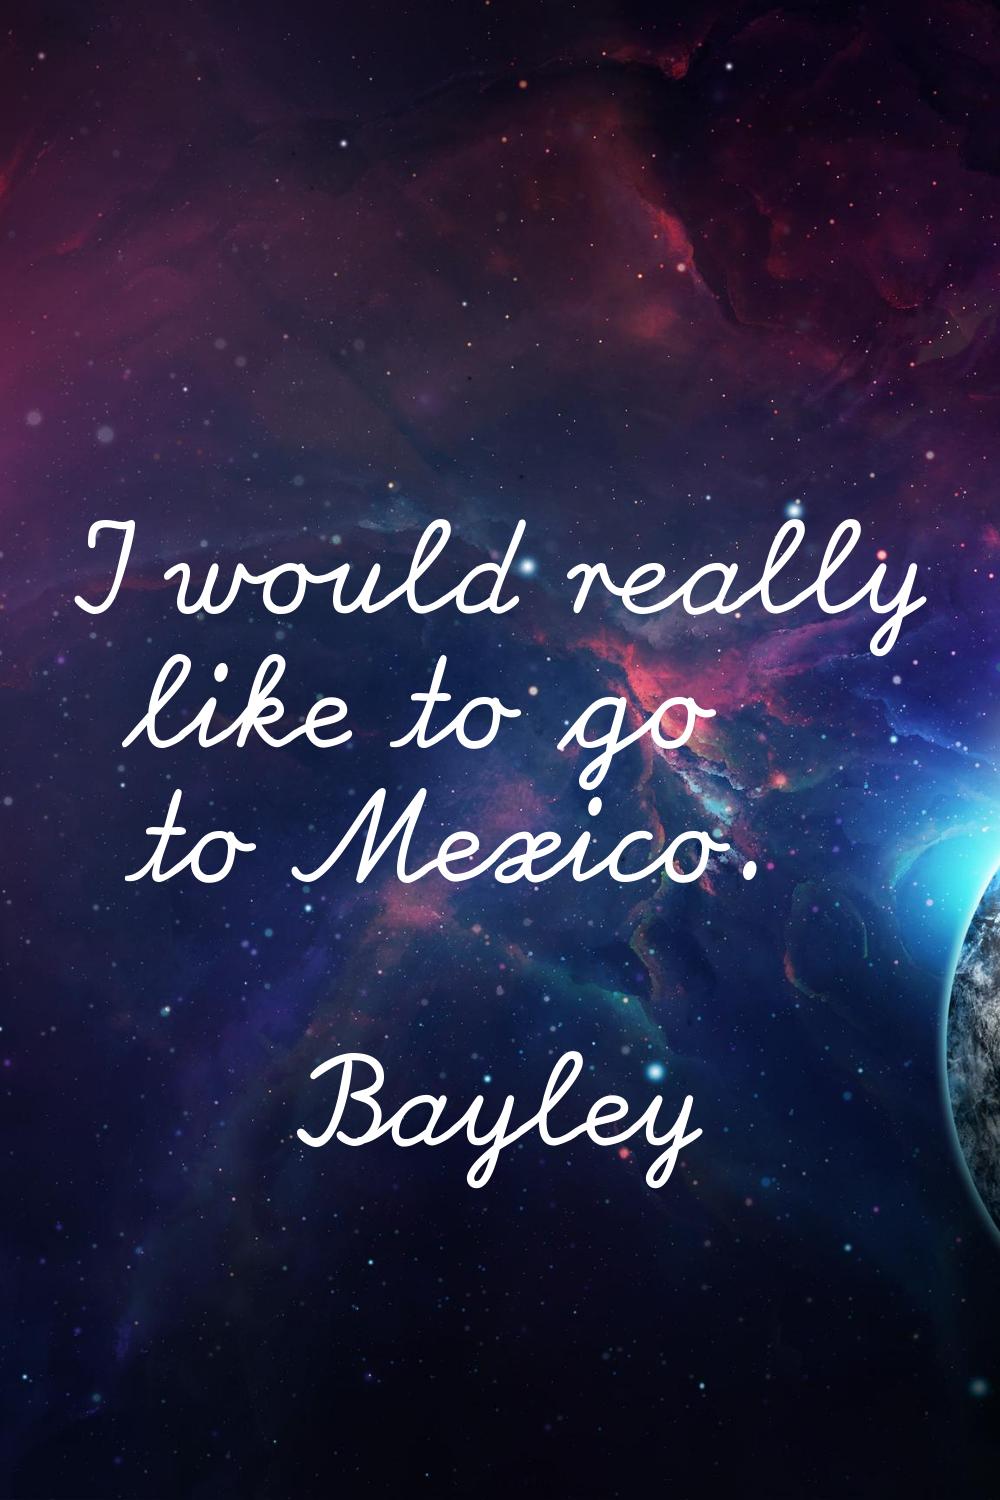 I would really like to go to Mexico.